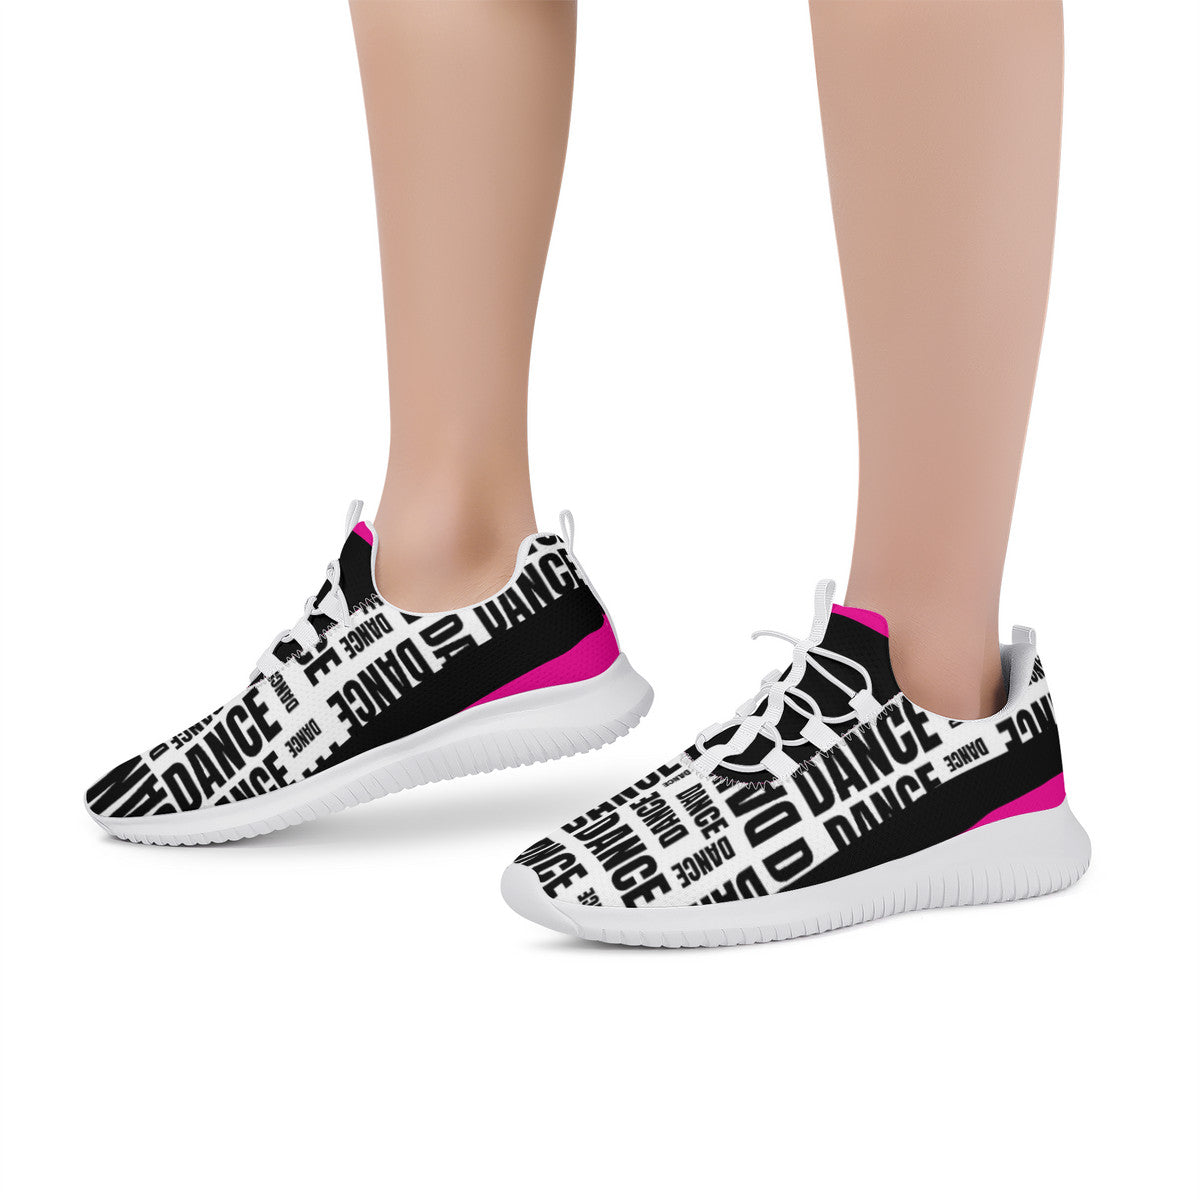 Dance sneakers - All-over Dance print